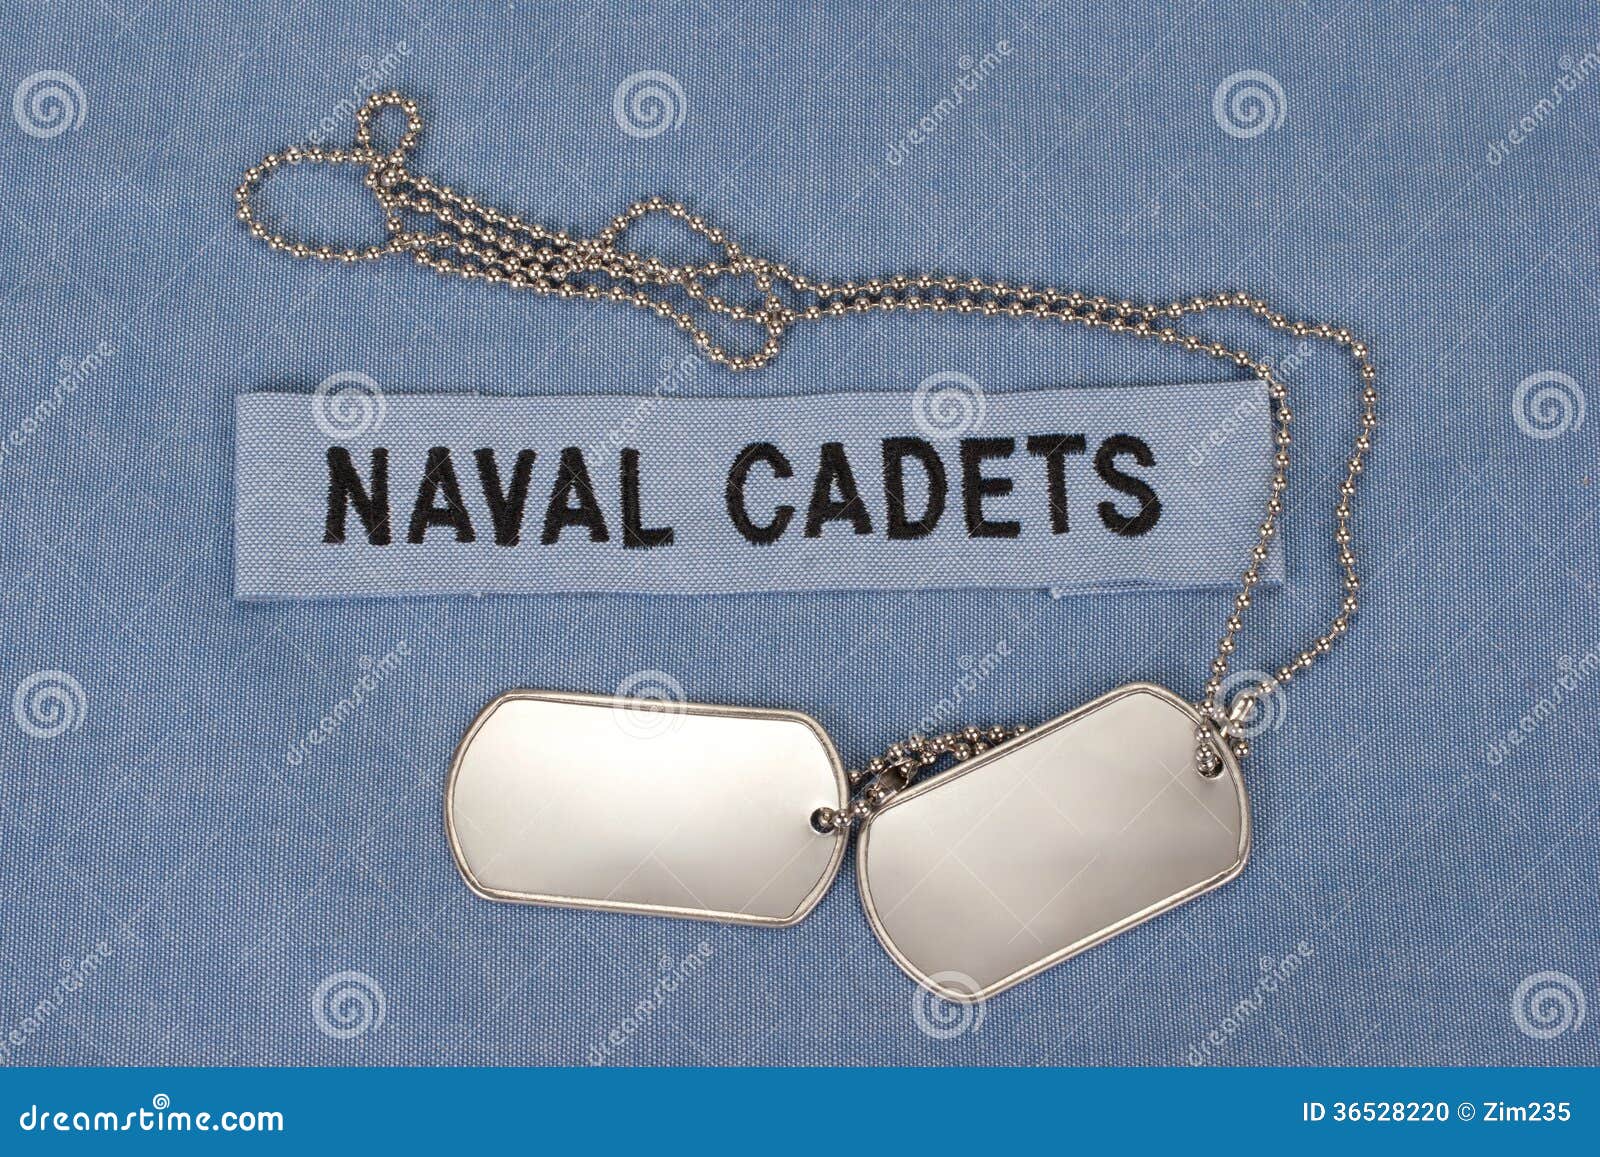 us naval cadets uniform with blank dog tags